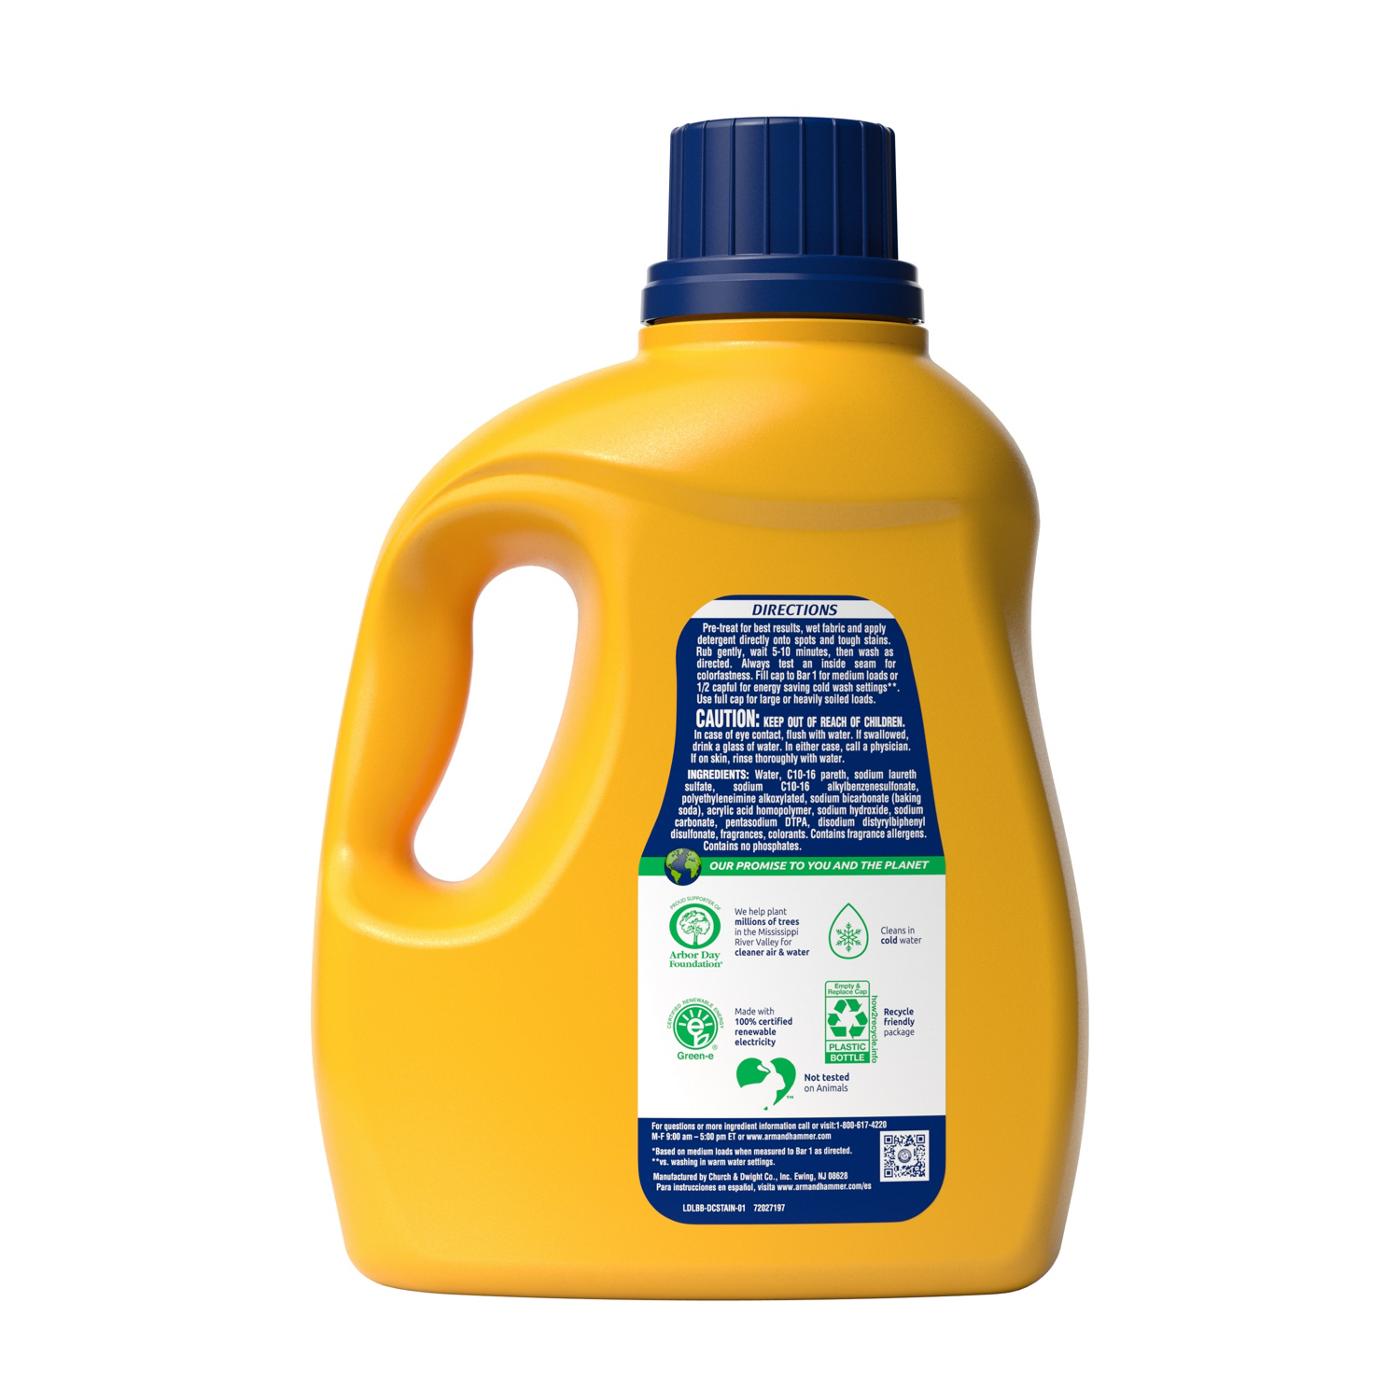 Arm & Hammer Deep Clean Stain HE Liquid Laundry Detergent, 68 Loads - Sparkling Clean; image 2 of 2